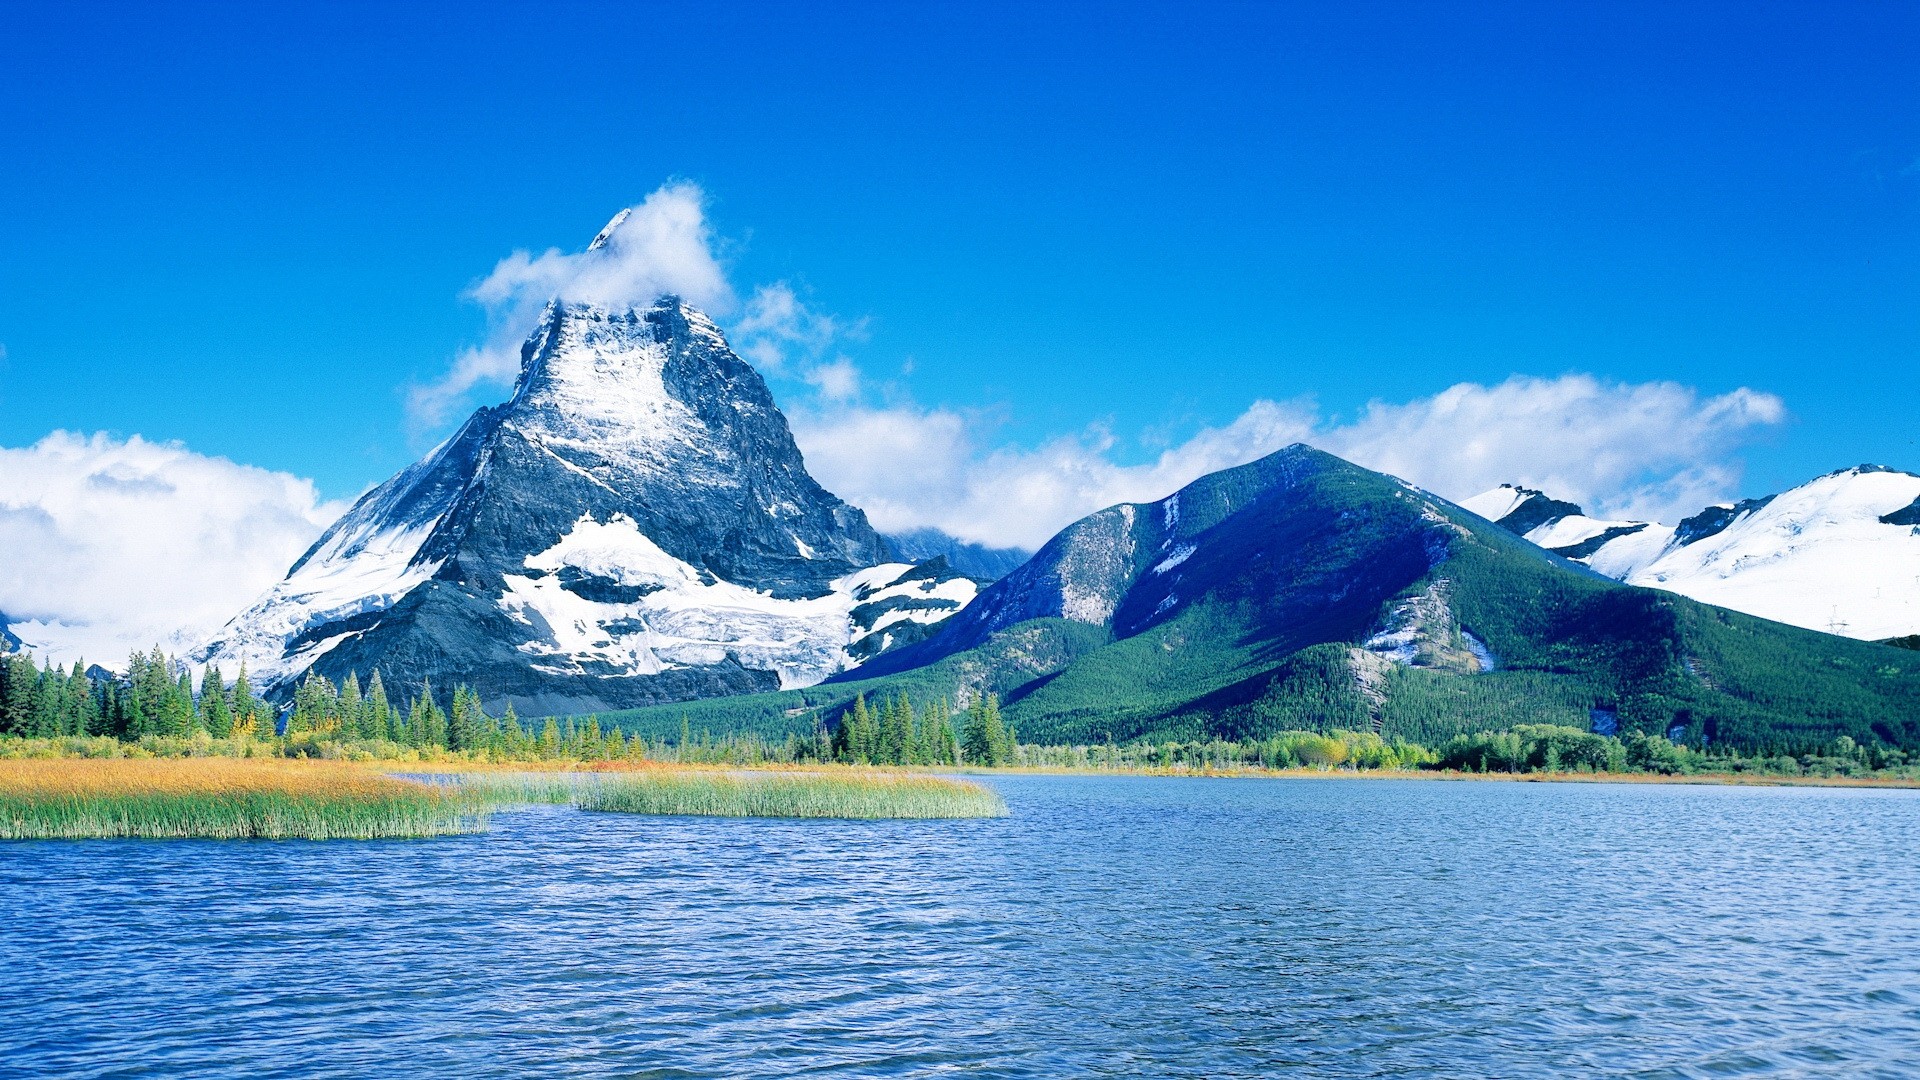 Background Full HD 1080p. Wallpaper mountains, water, tops, snow, day